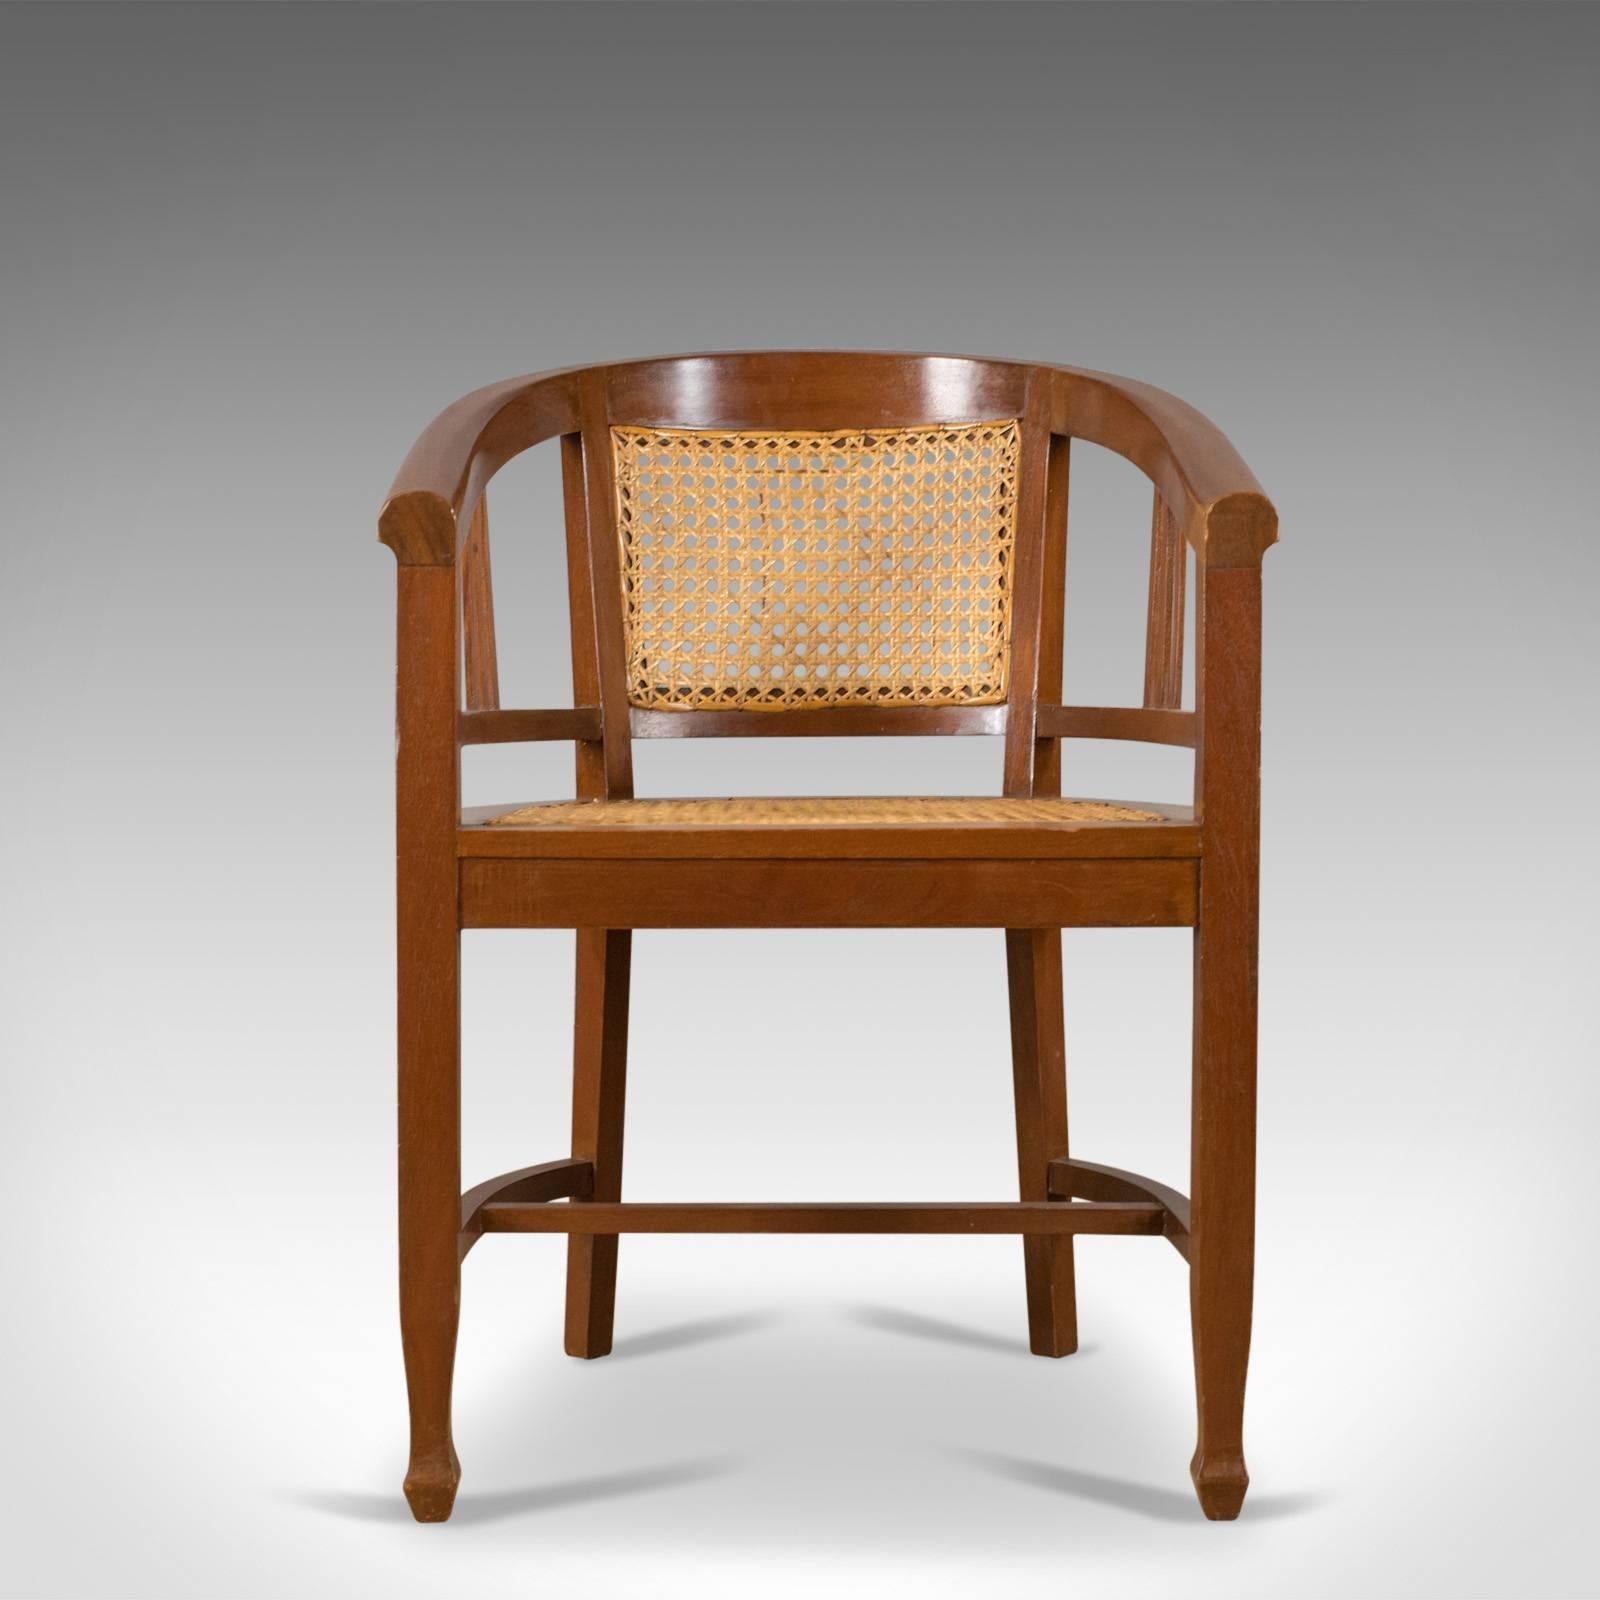 This is a set of four elbow chairs, 20th century, contemporary tub dining chairs in a cane bergère style displaying oriental influence.

Solid mahogany frames in good order throughout
The chairs display well in rich, coffee tones
Of quality